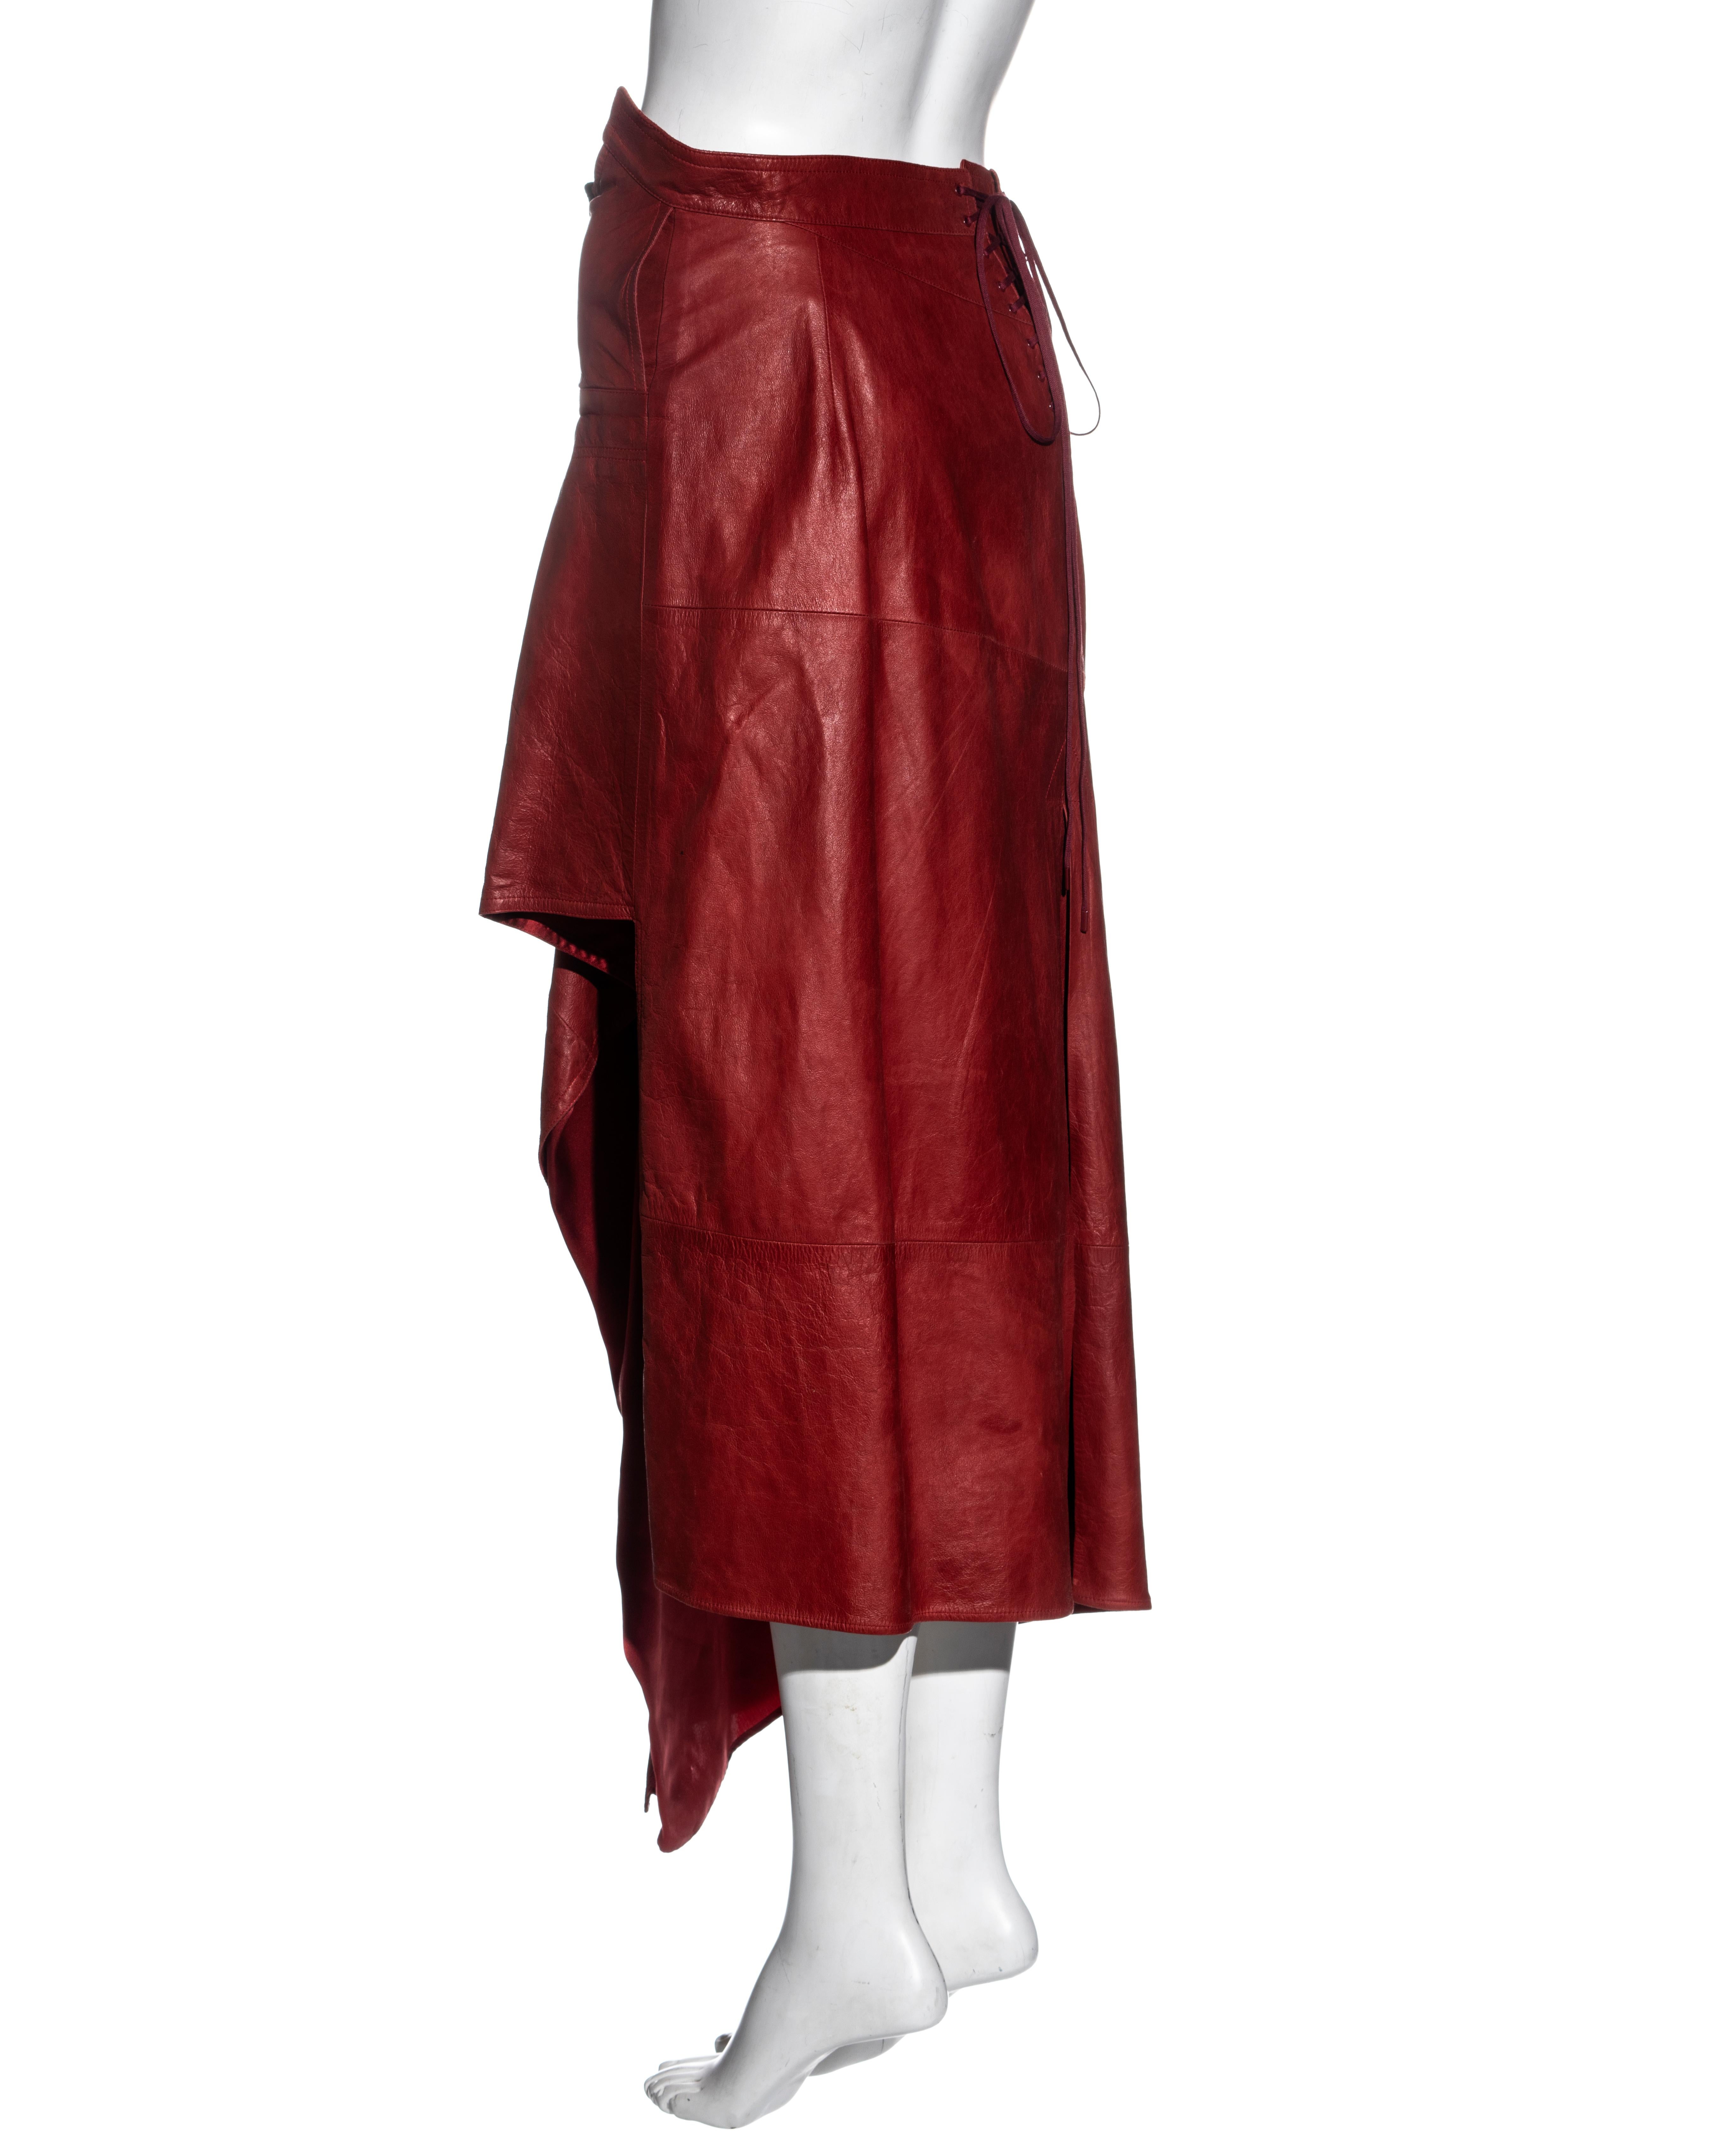 Christian Dior by John Galliano red leather asymmetric cut skirt, ss 2000 3